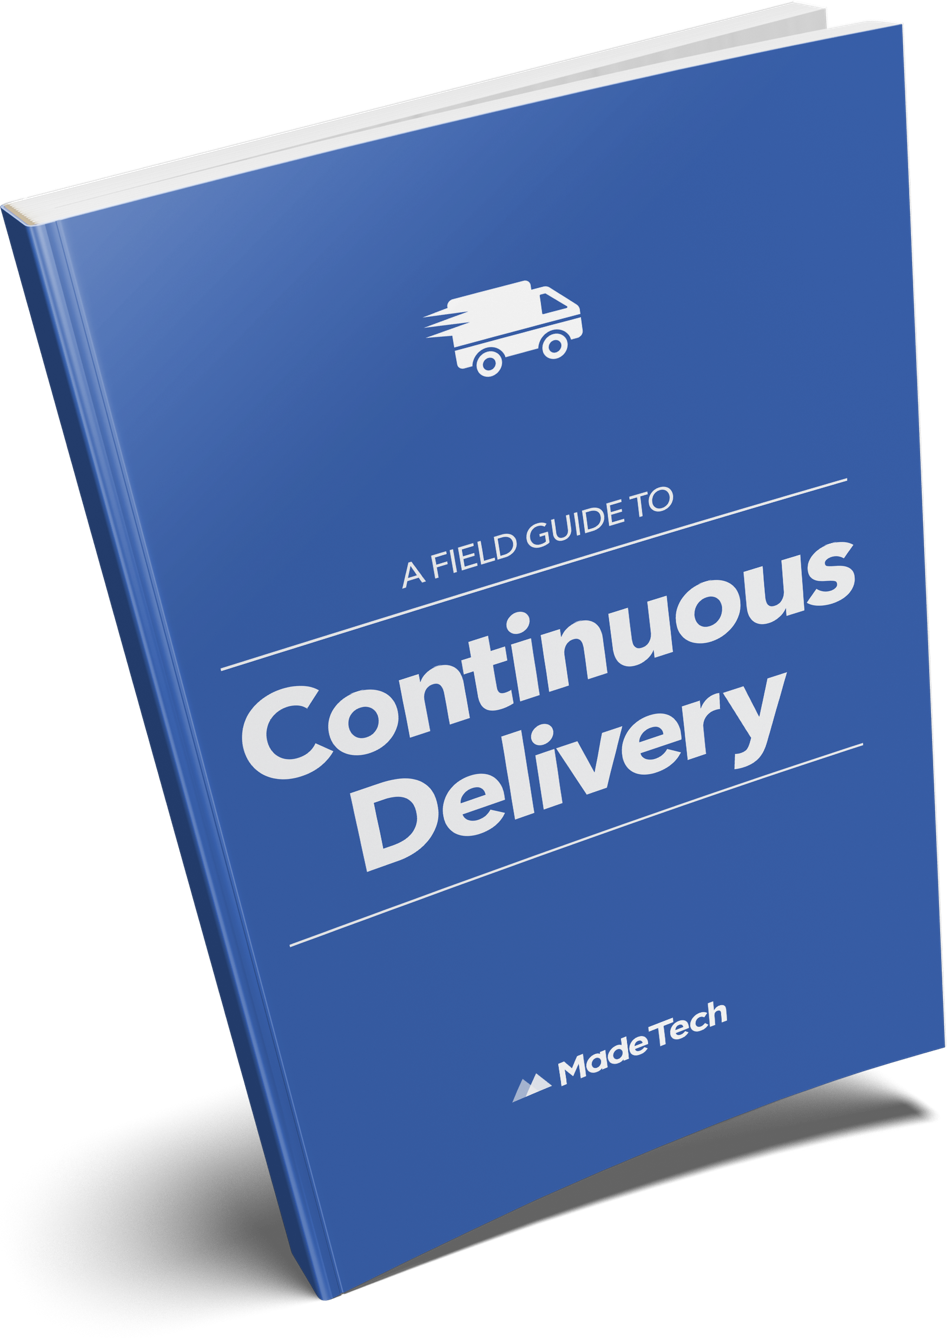 A field guide to continuous delivery book cover